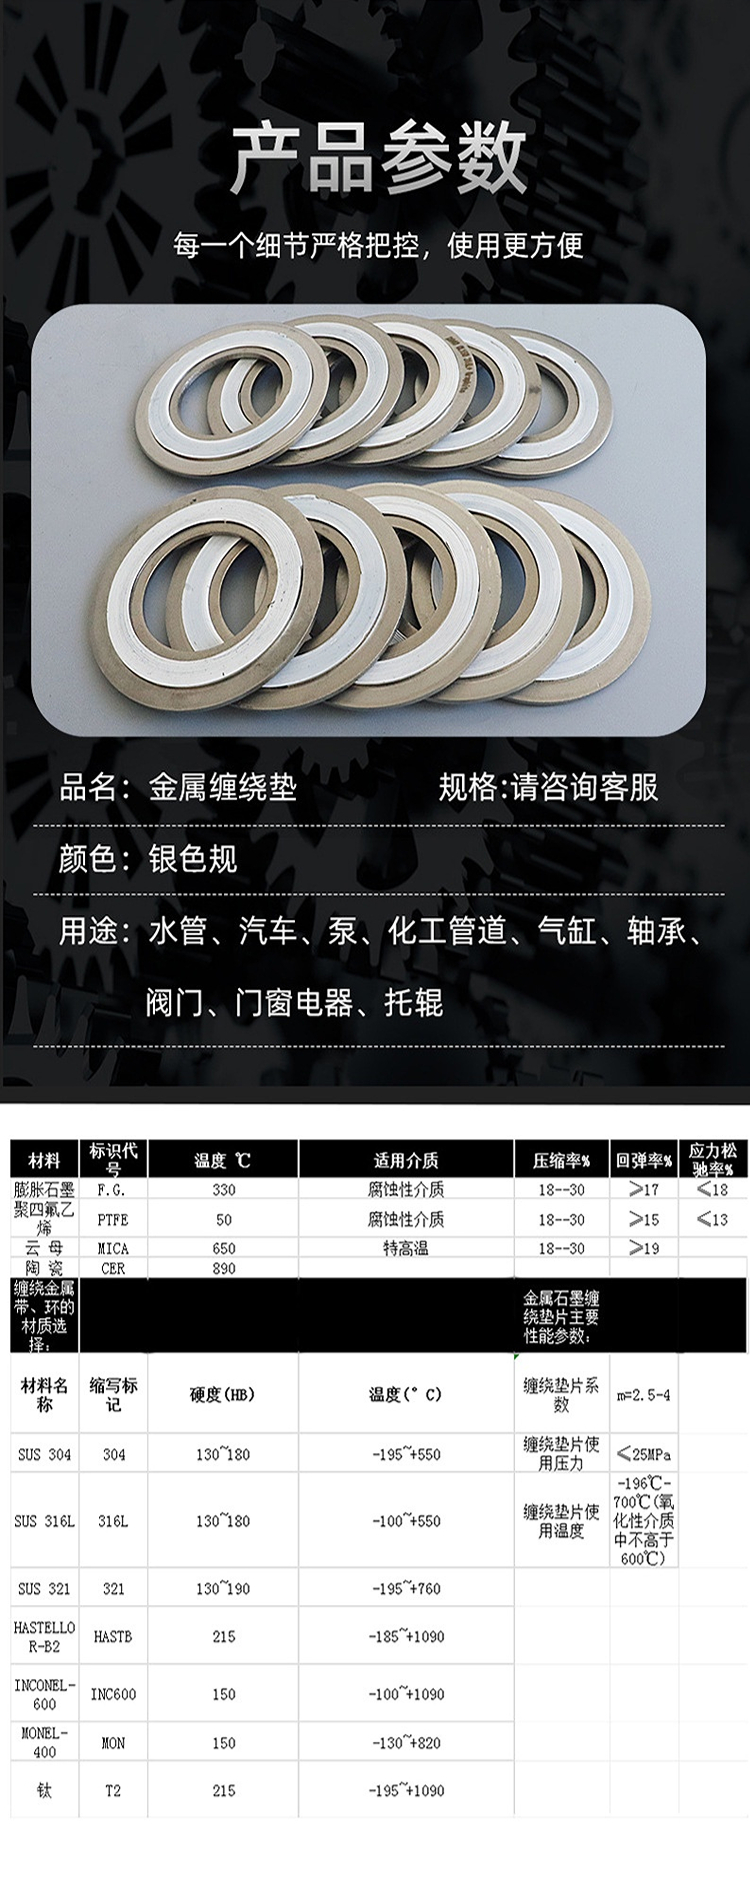 Ocean Ocean Inner and Outer Ring Metal Cushion Graphite Asbestos Teflon Wound Sealing Ring Stainless Steel 304 High Temperature and Corrosion Resistance